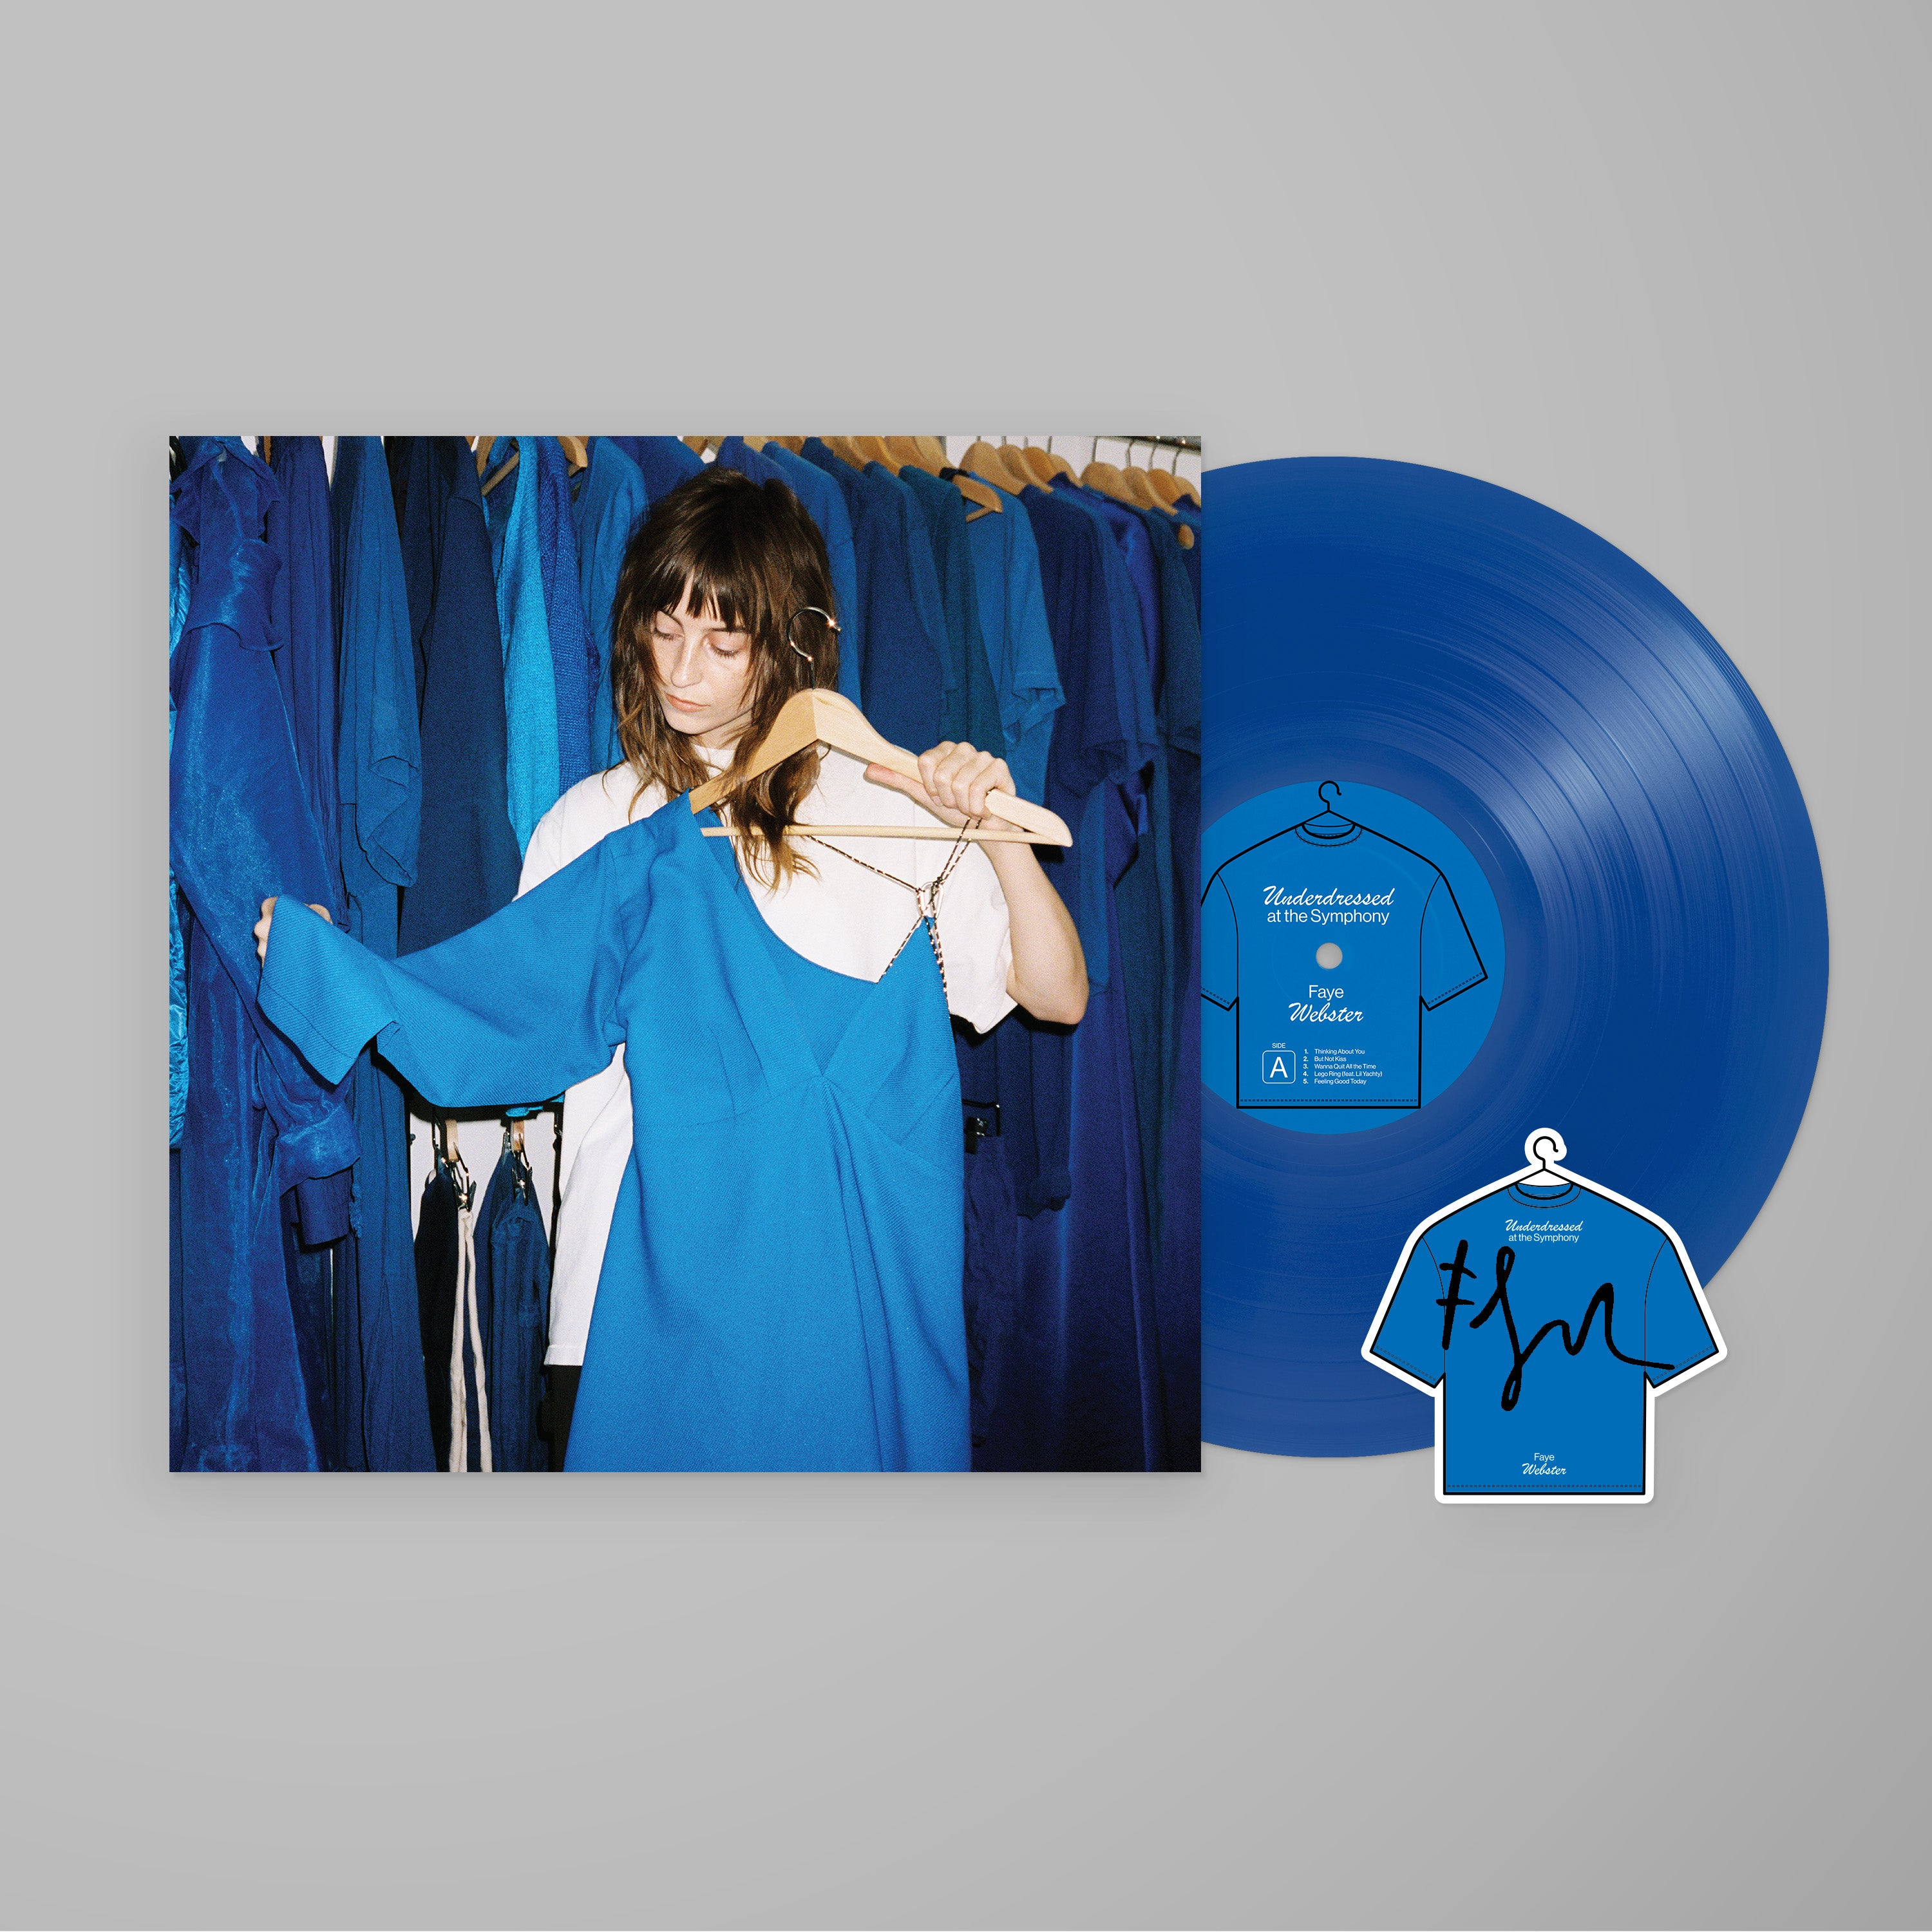 Faye Webster - Underdressed at the Symphony: Limited 'Faye Blue' Vinyl LP (w/ Signed Insert)